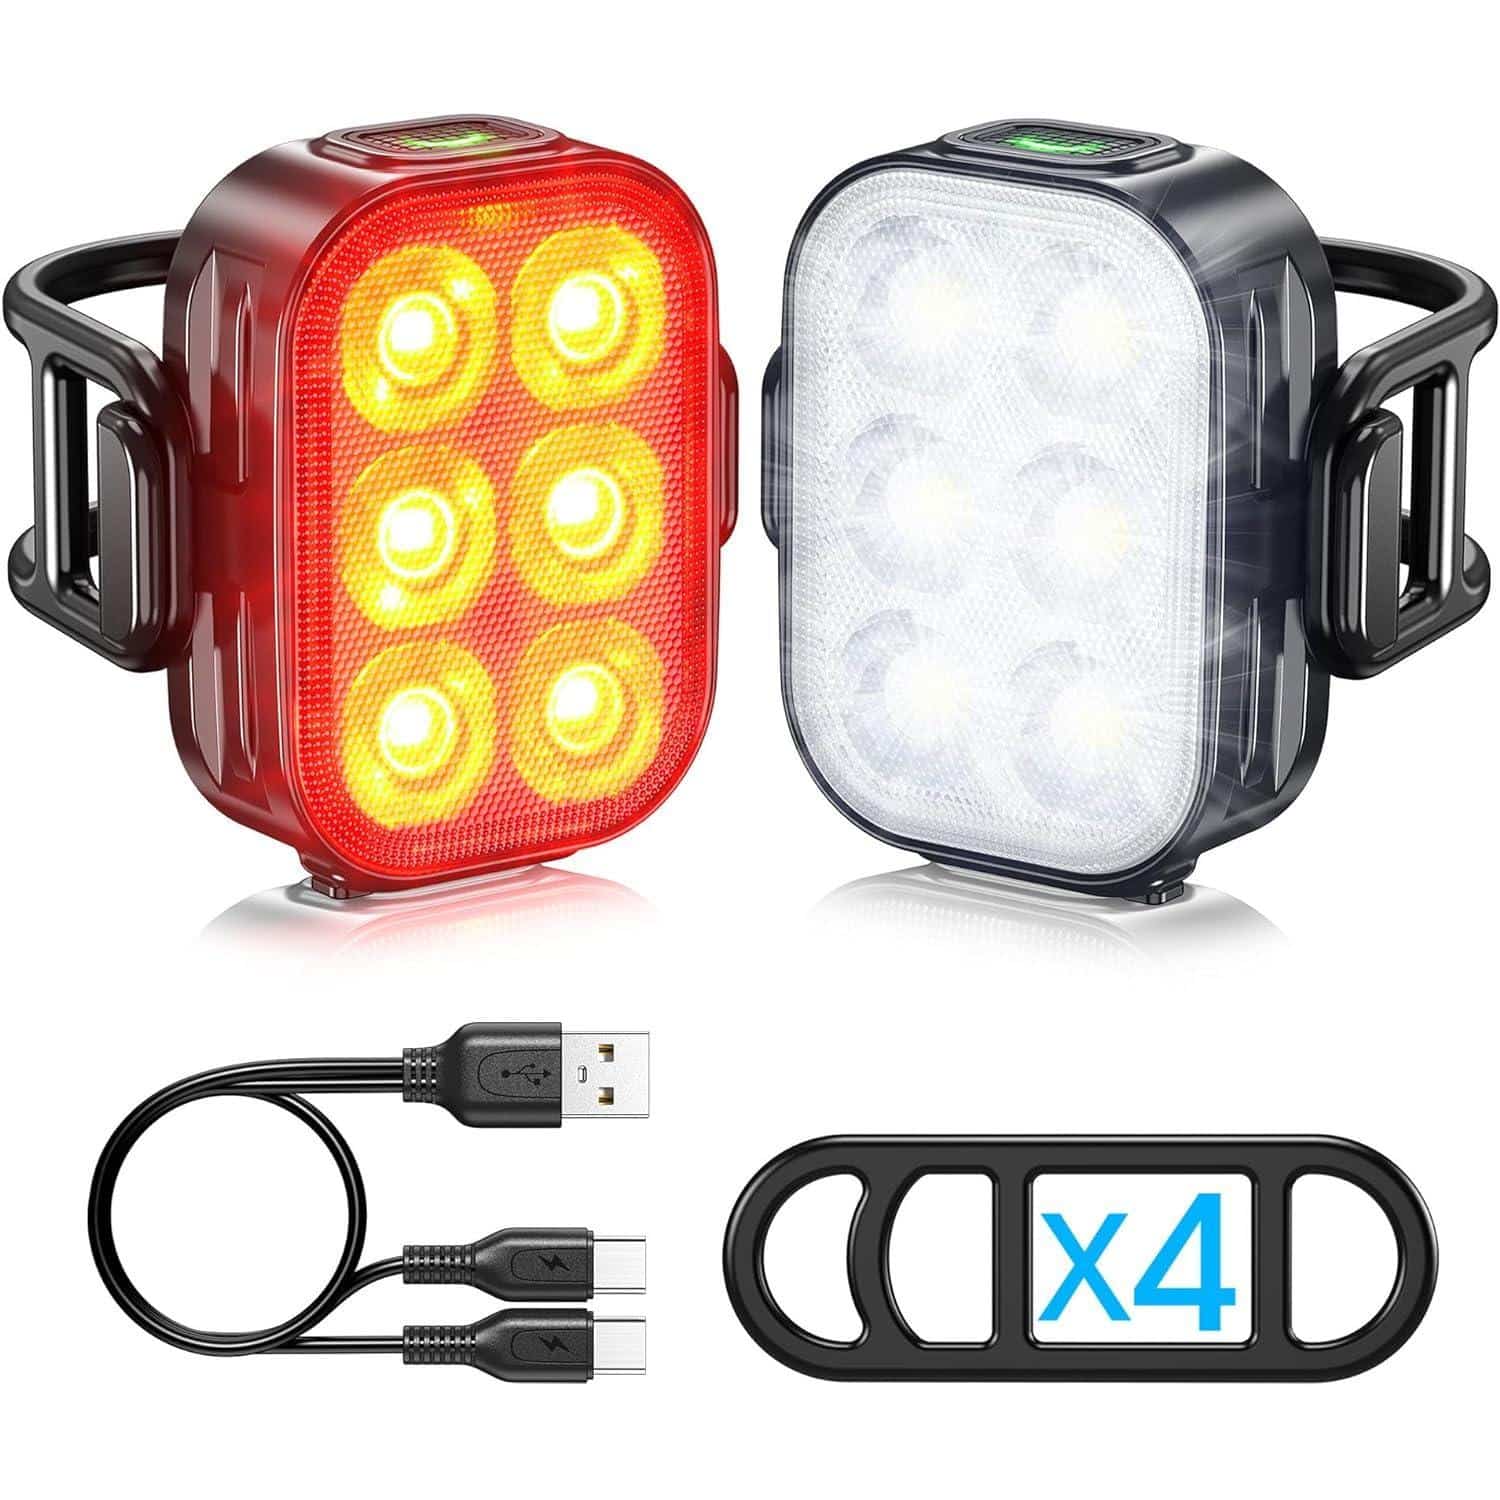 Bike Lights, Combination of Bike Front Light and Tail Light, IP65 Waterproof USB Charging, Equipped with 6 Ultra-Bright LED